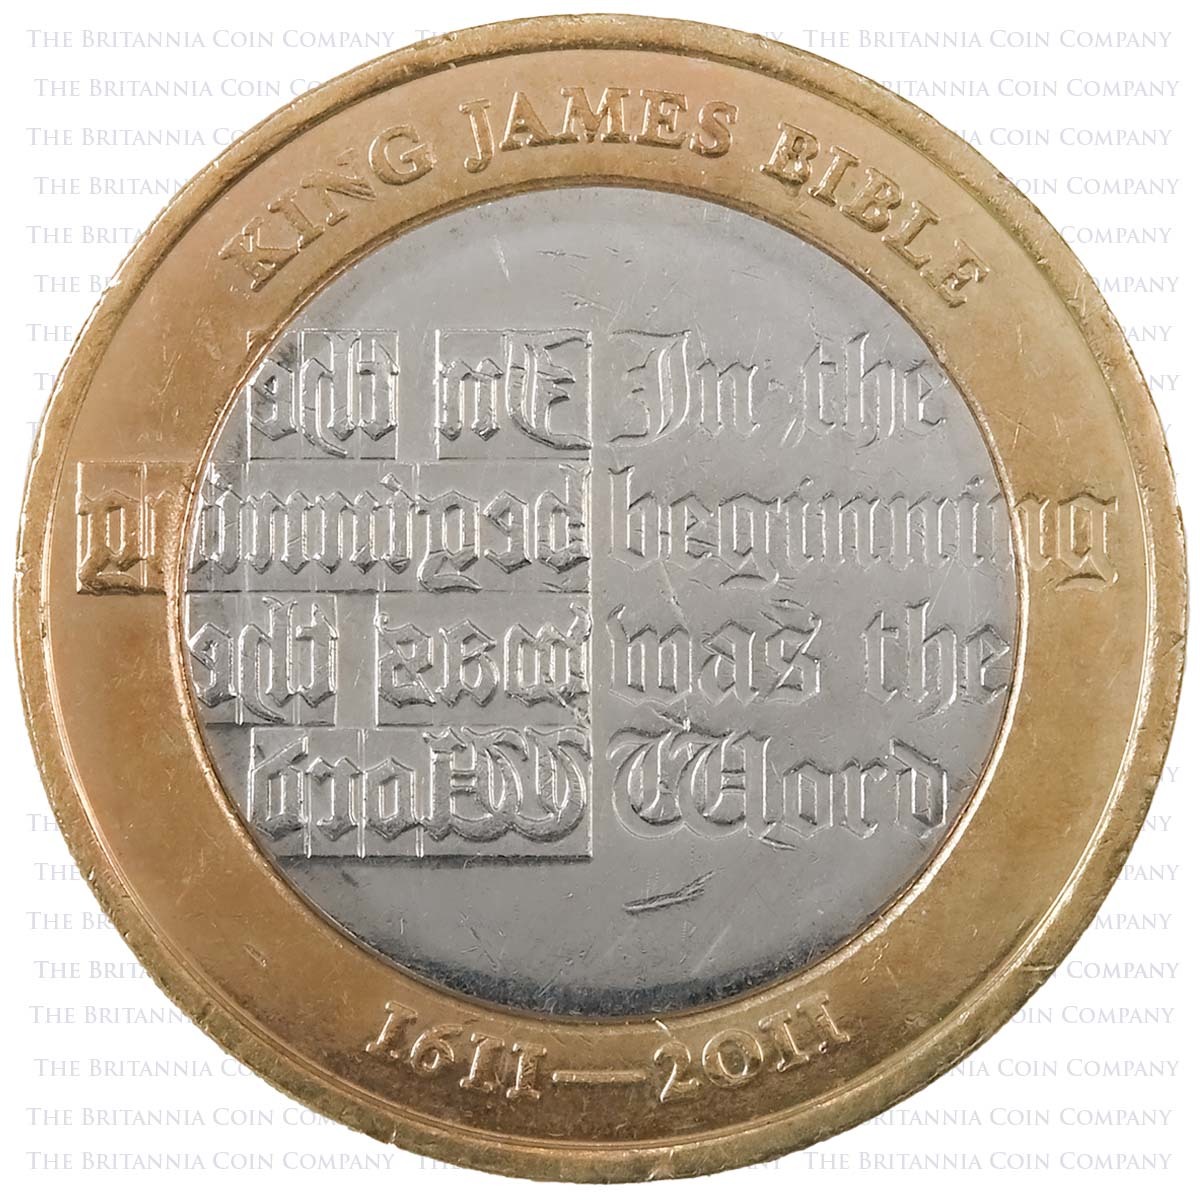 2011 King James Bible Circulated Two Pound Coin Reverse